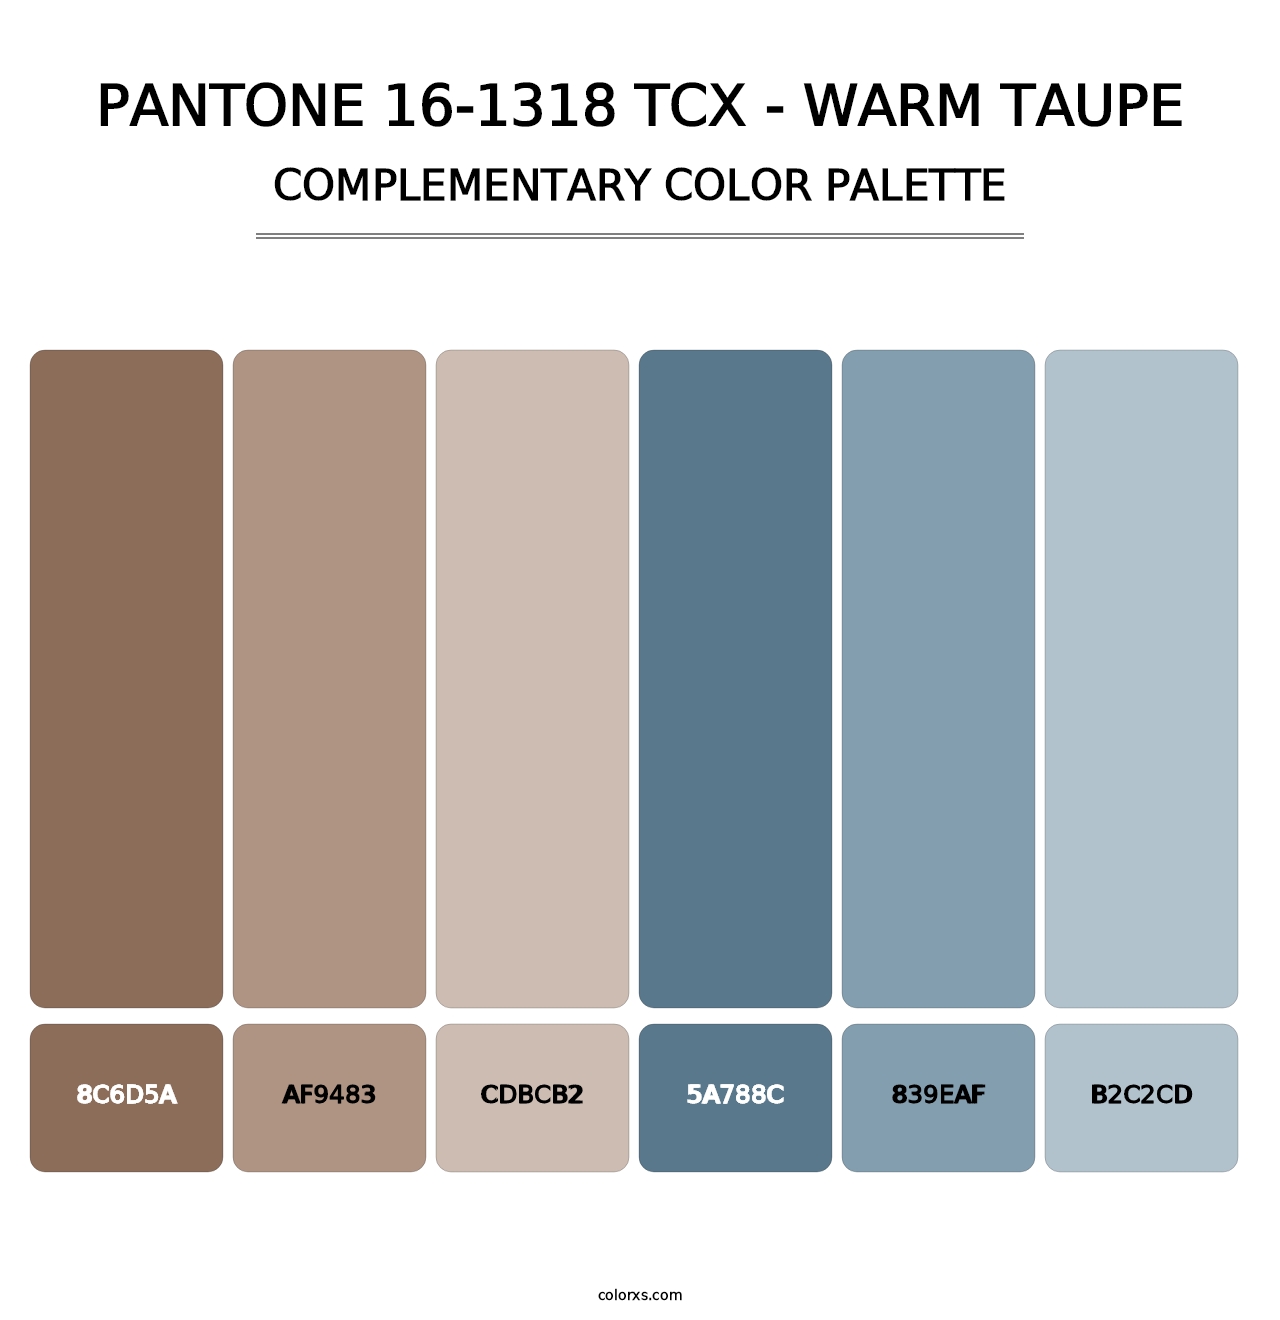 PANTONE 16-1318 TCX - Warm Taupe - Complementary Color Palette